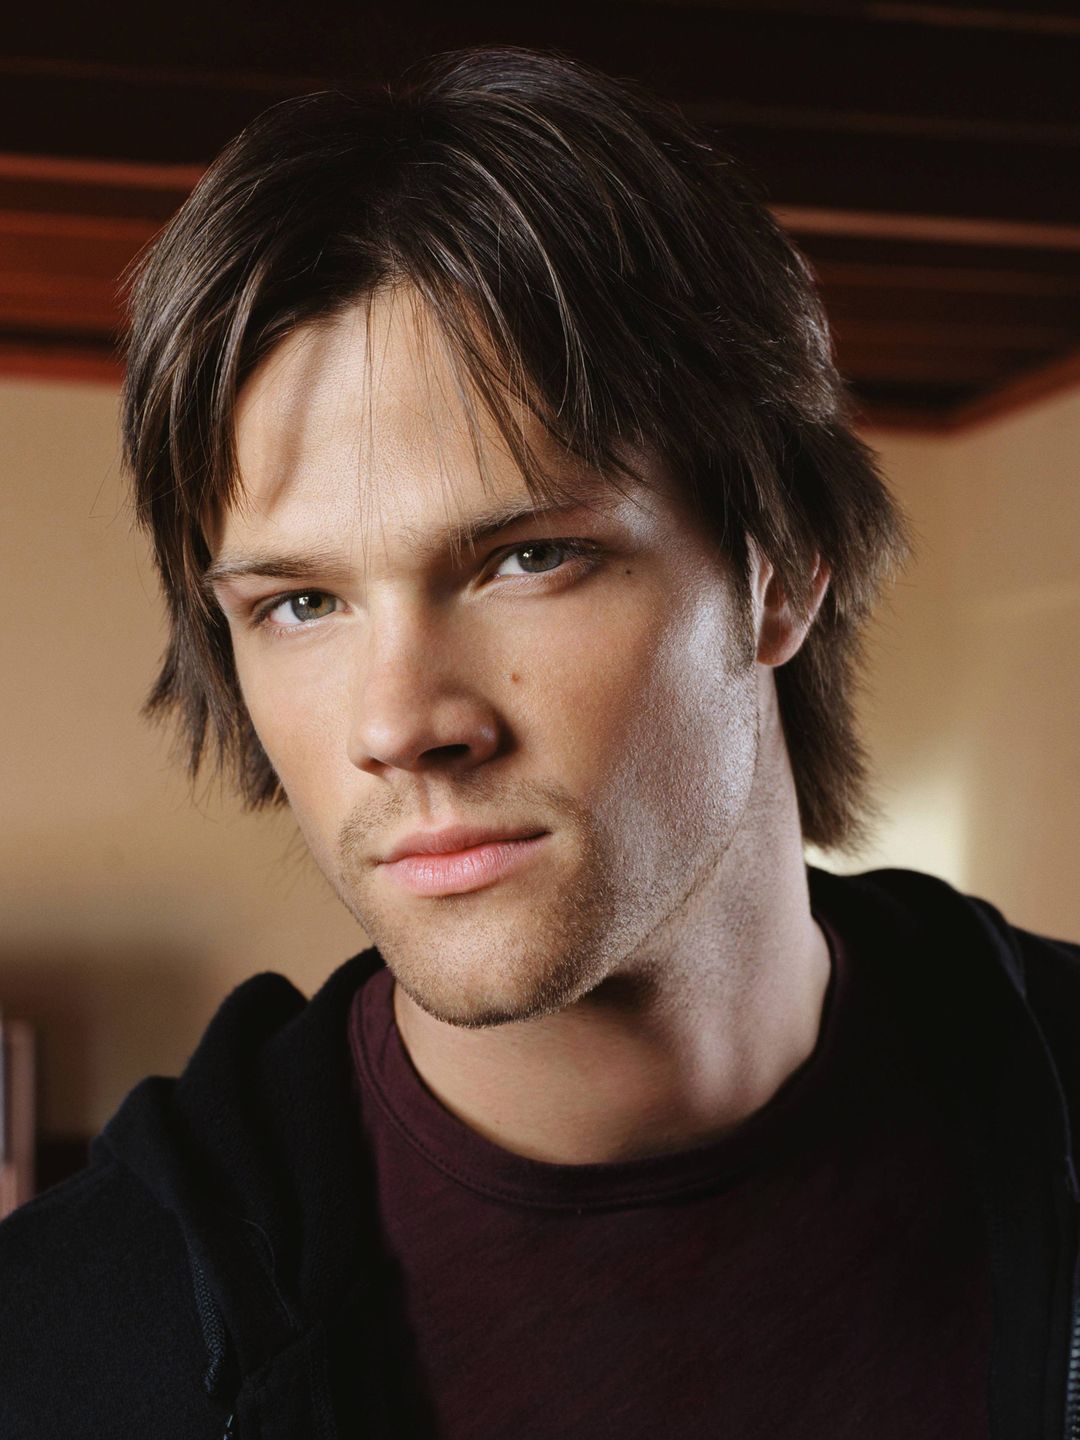 Jared Padalecki who is his father